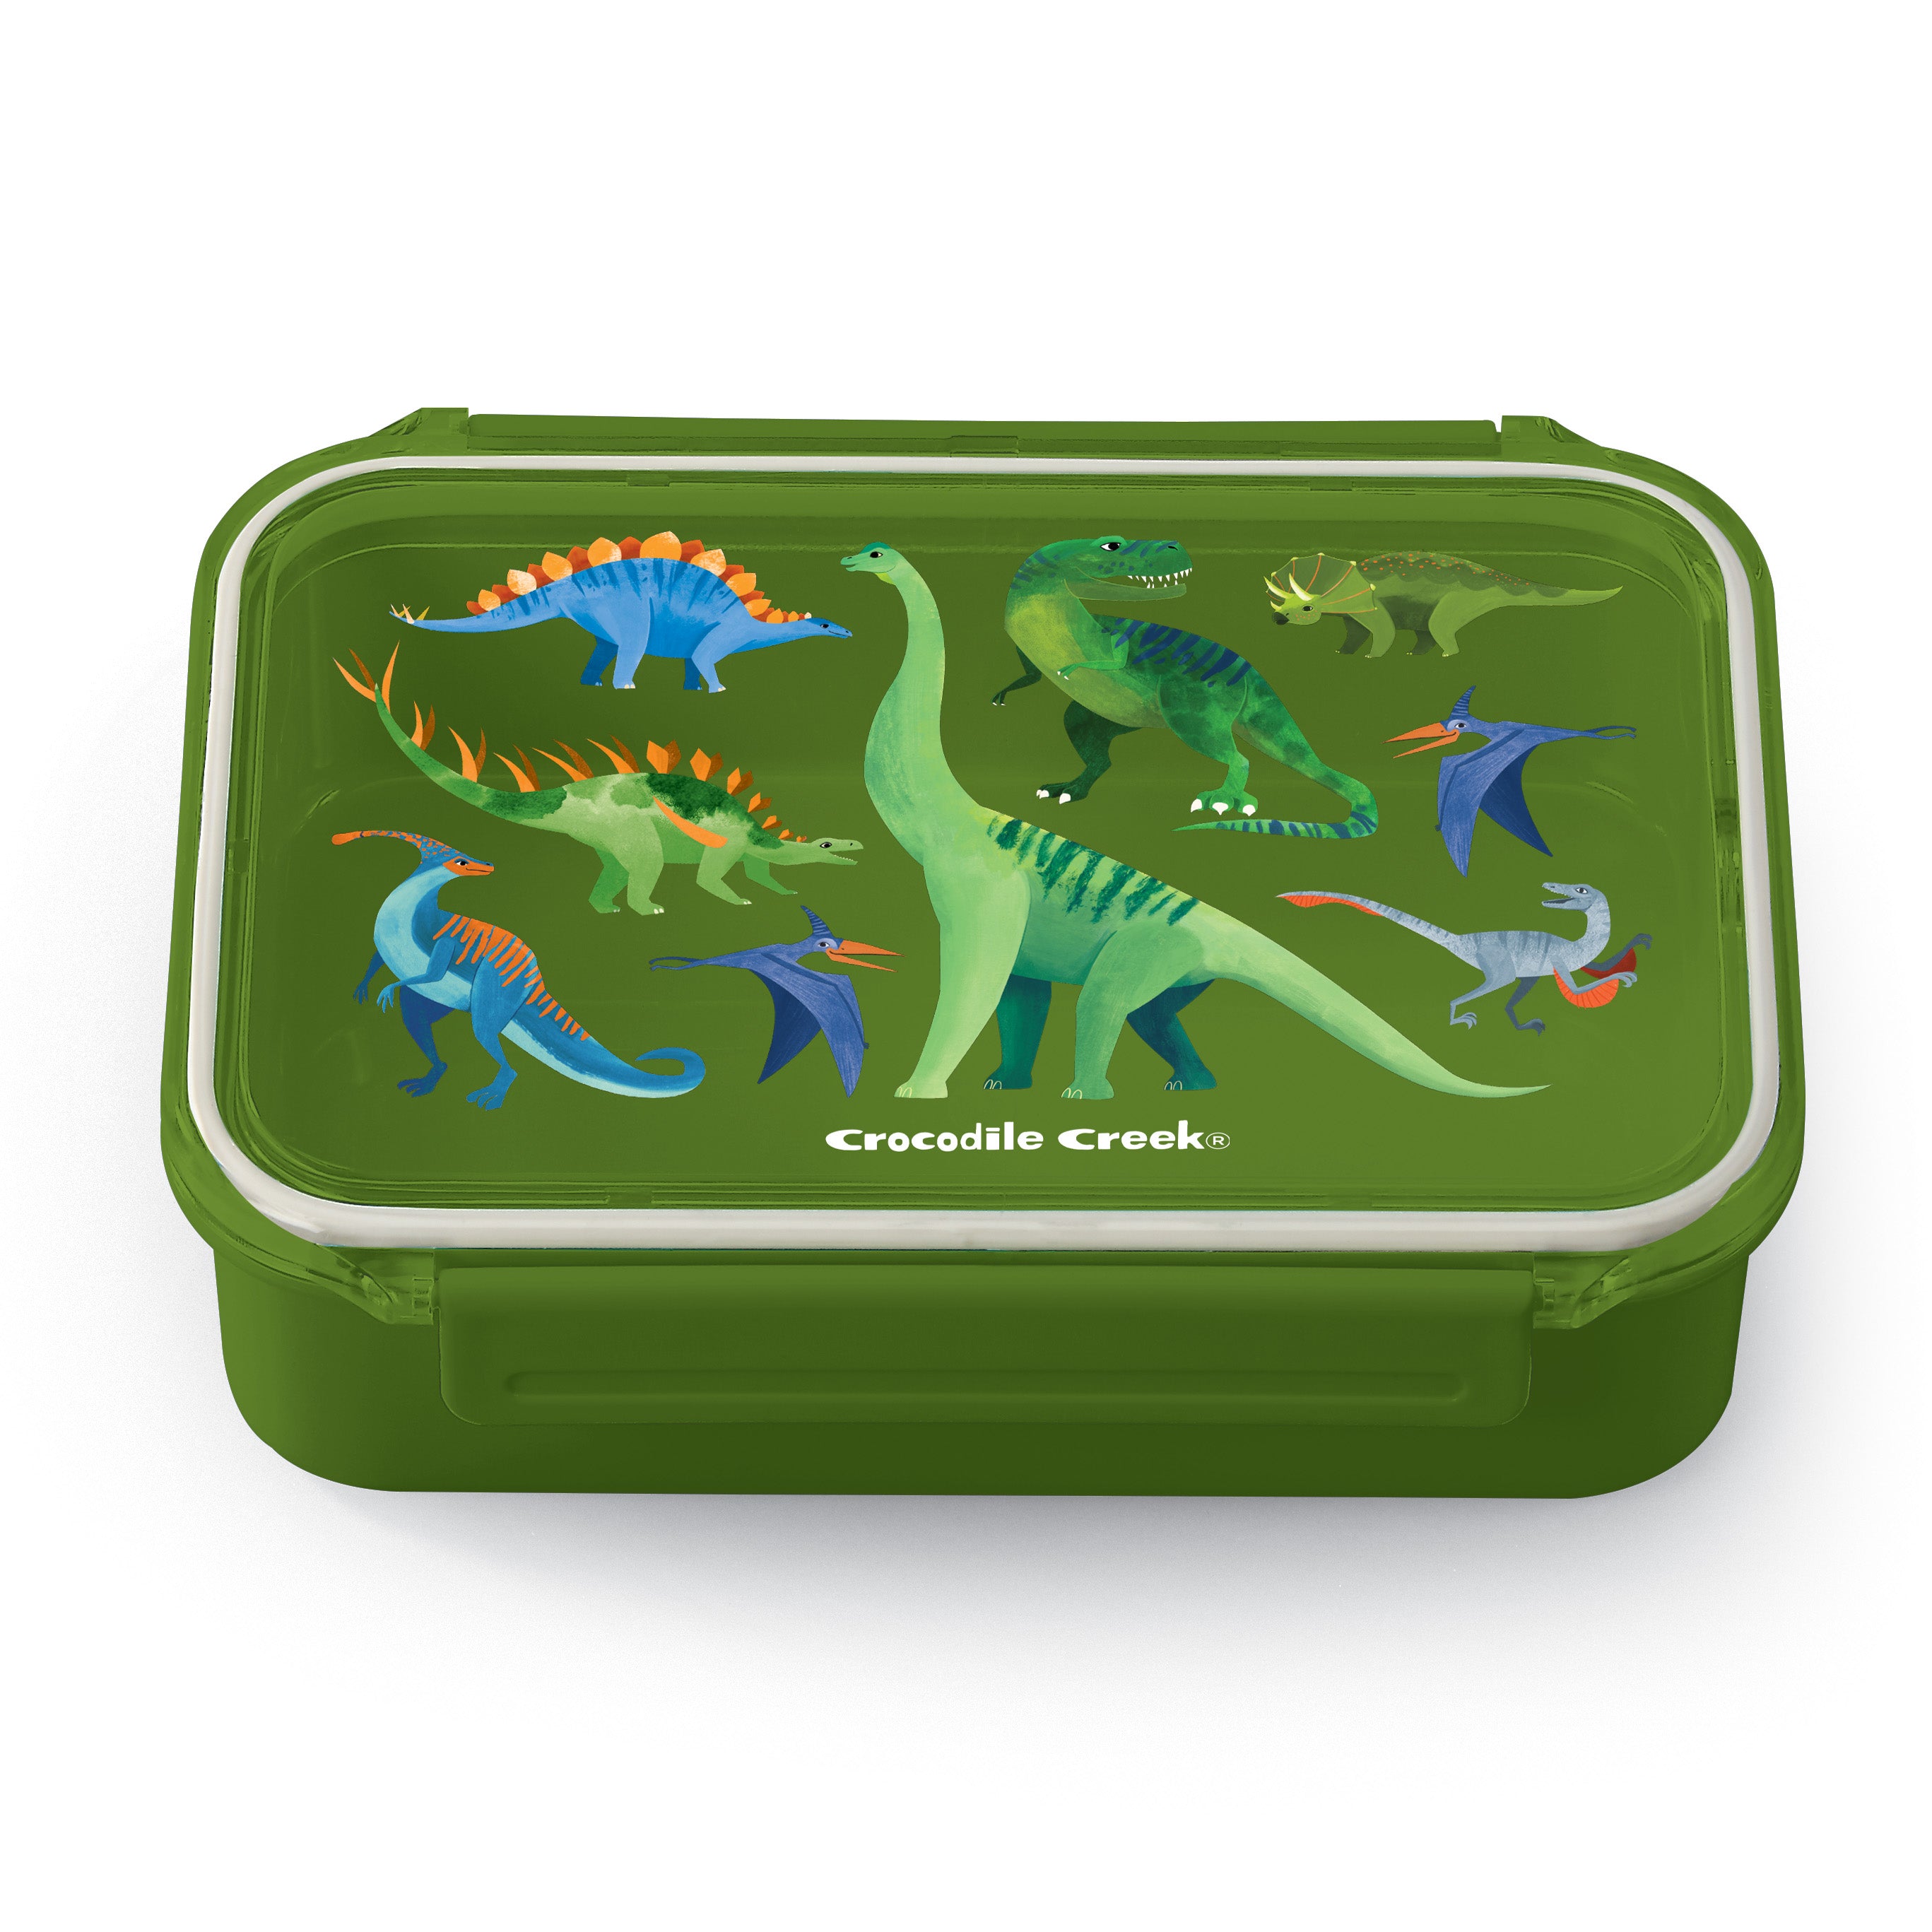 Personalised Lunch Box & Water Bottle Set Kids Lunch Bag Boys Lunch Box Kids  Water Bottles Dinosaur Lunch Box Space Lunch Box 